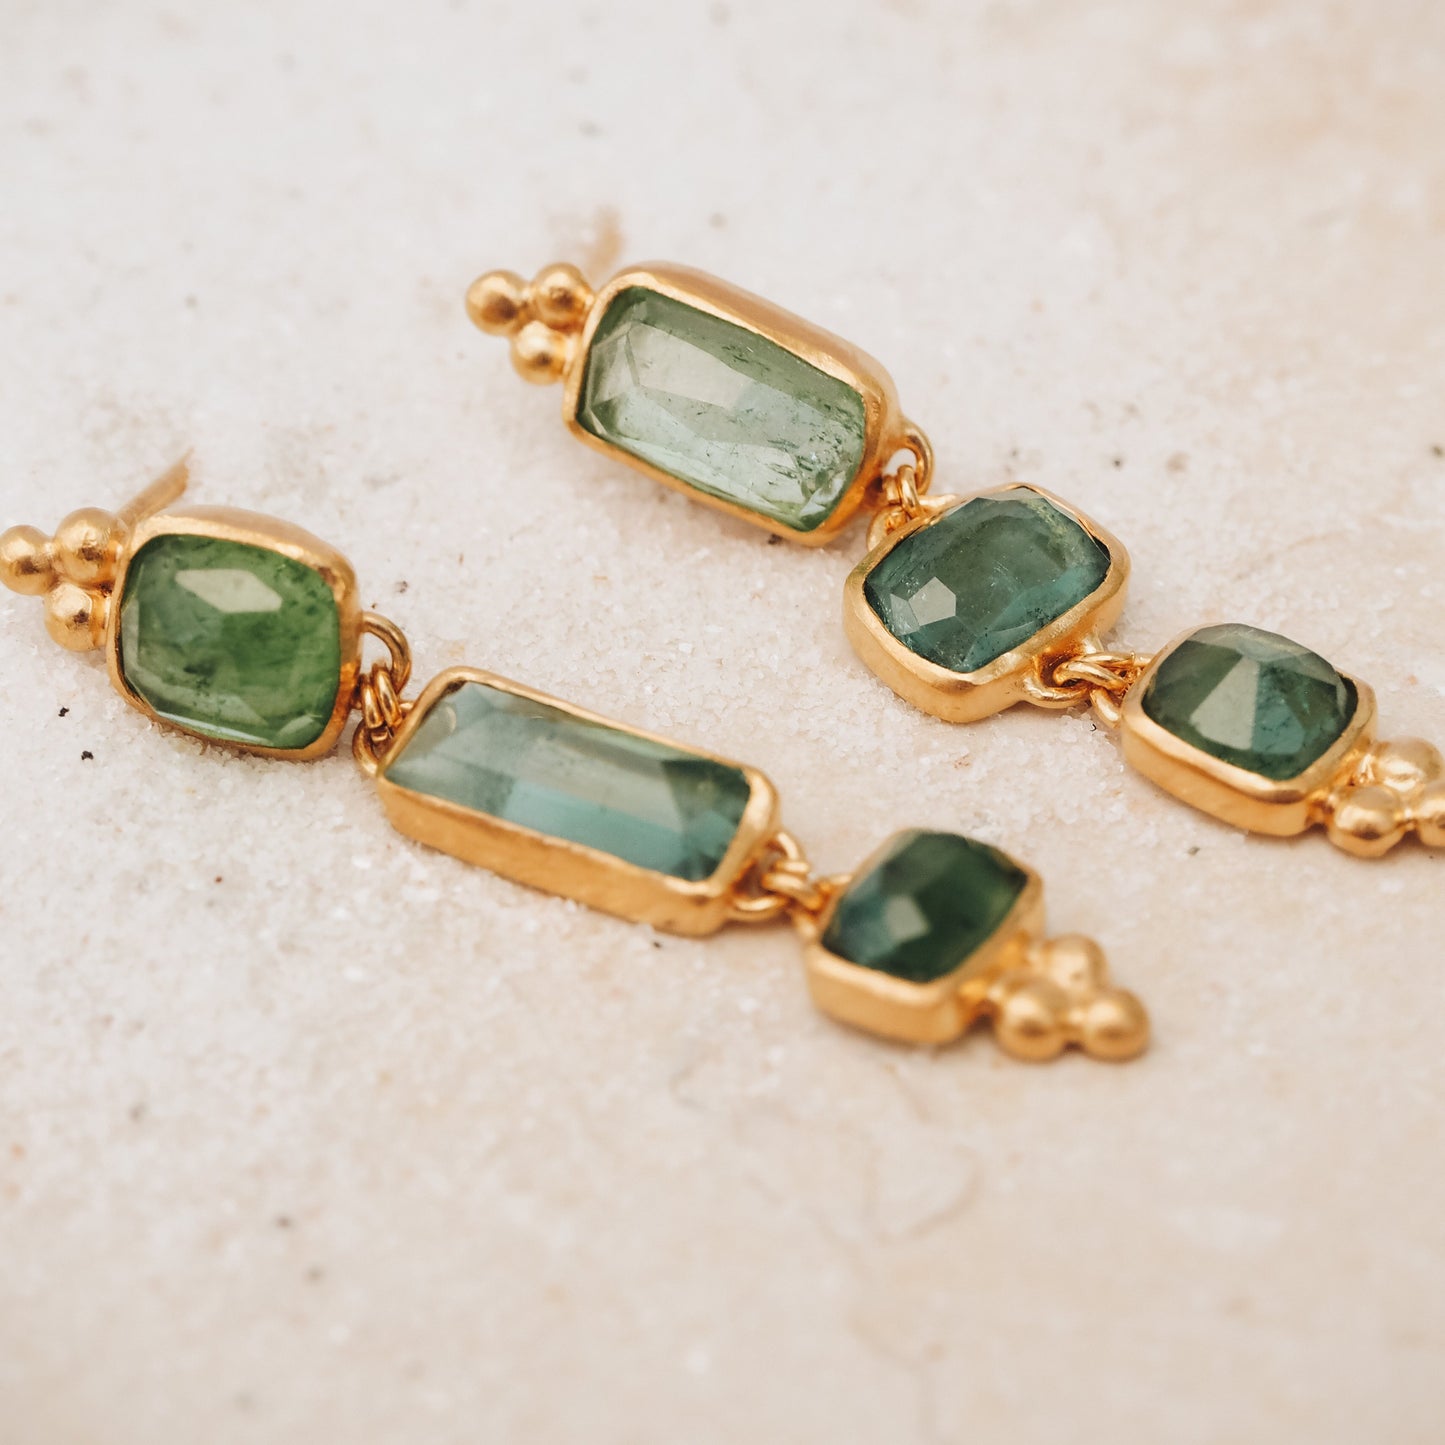 Gold gemstone drop earrings featuring one-of-a-kind square rose cut tourmaline in ocean blue and green, intricately accented with granulation